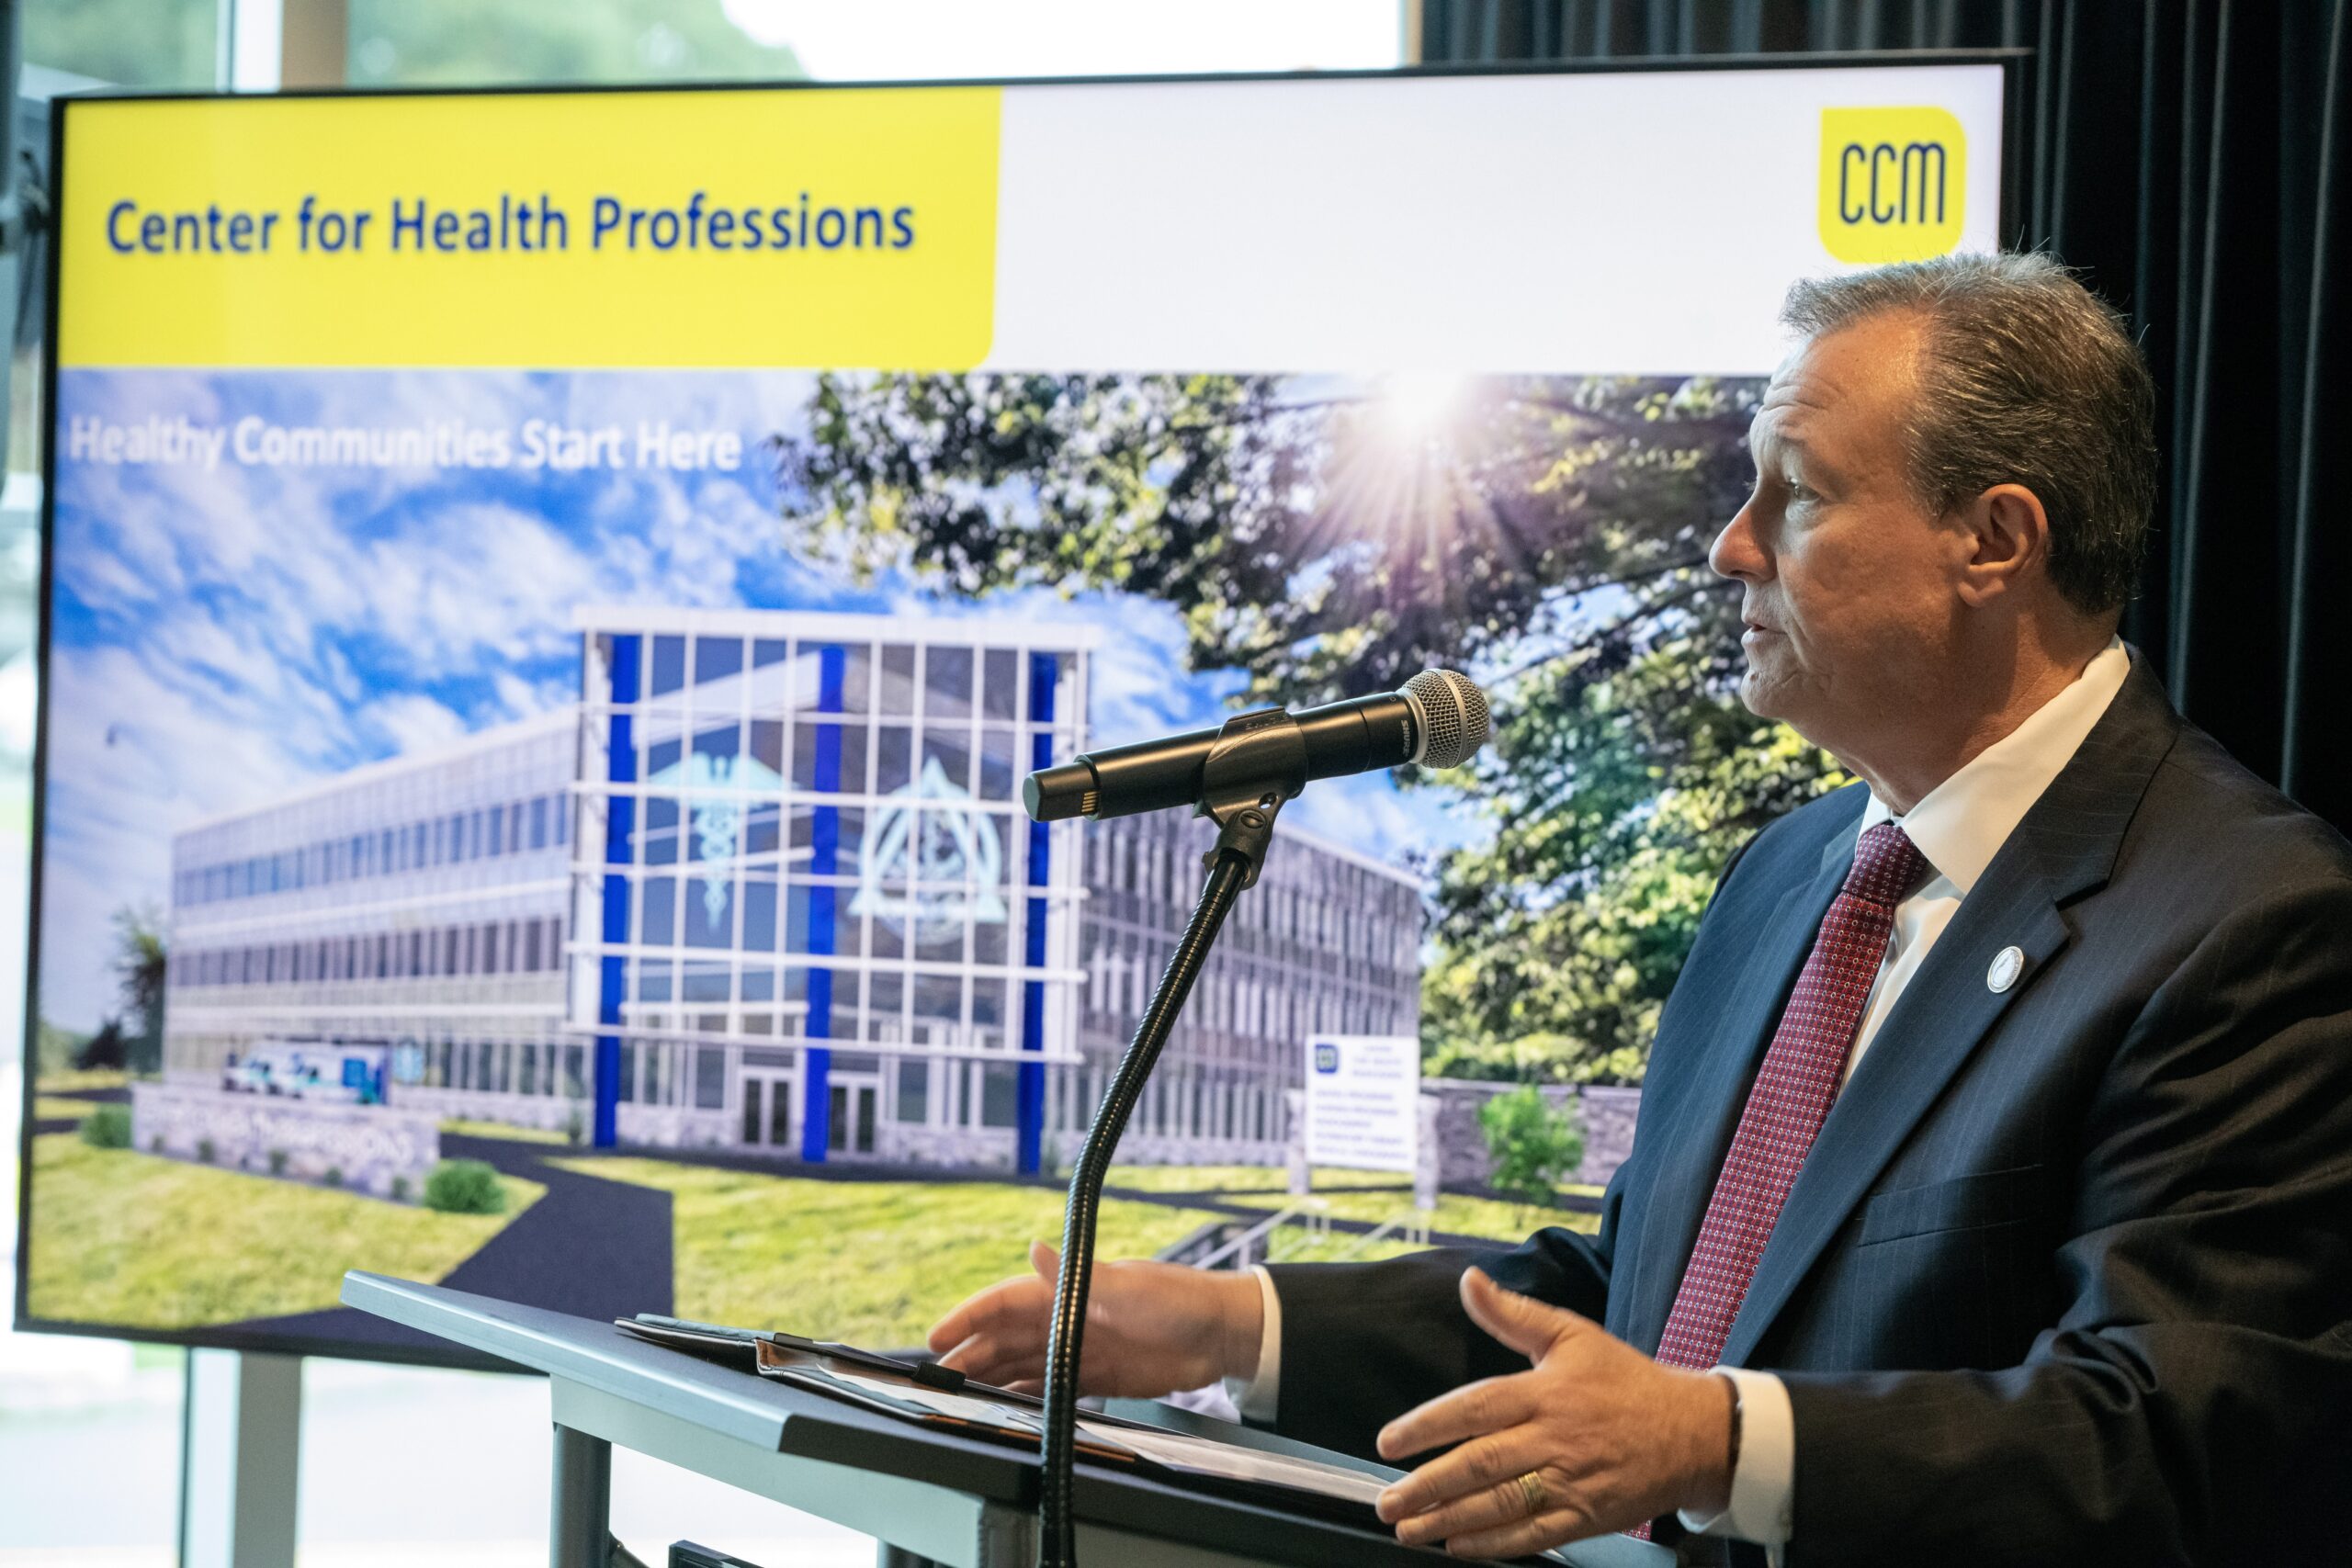 CCM to Expand the Campus Footprint with a New Cutting-Edge Learning Center to Support the Healthcare Industry